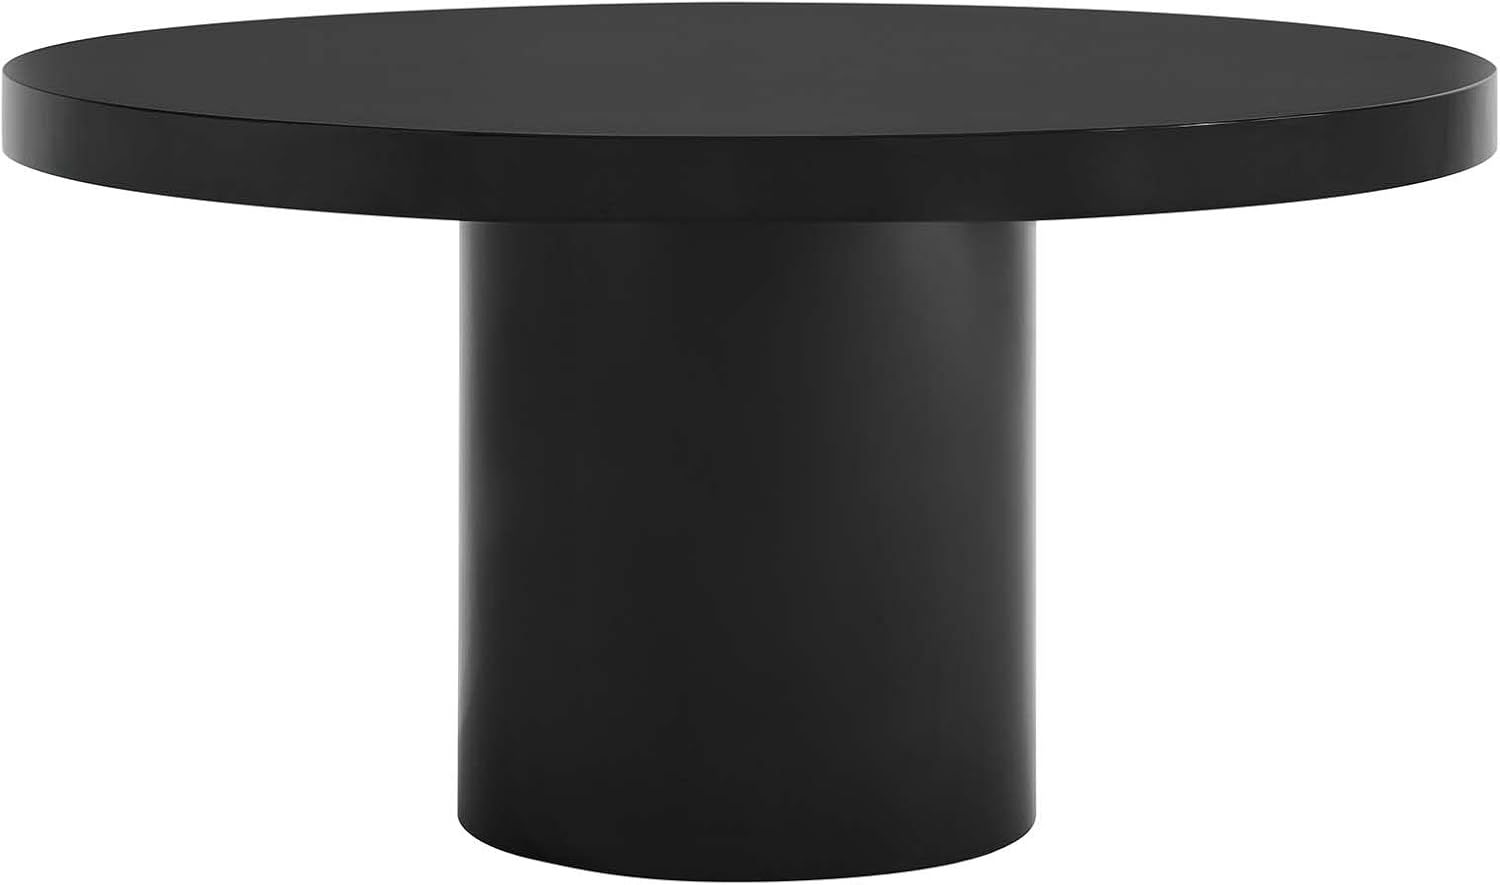 Modway Gratify 60" Round Dining Table in Black | Amazon (US)